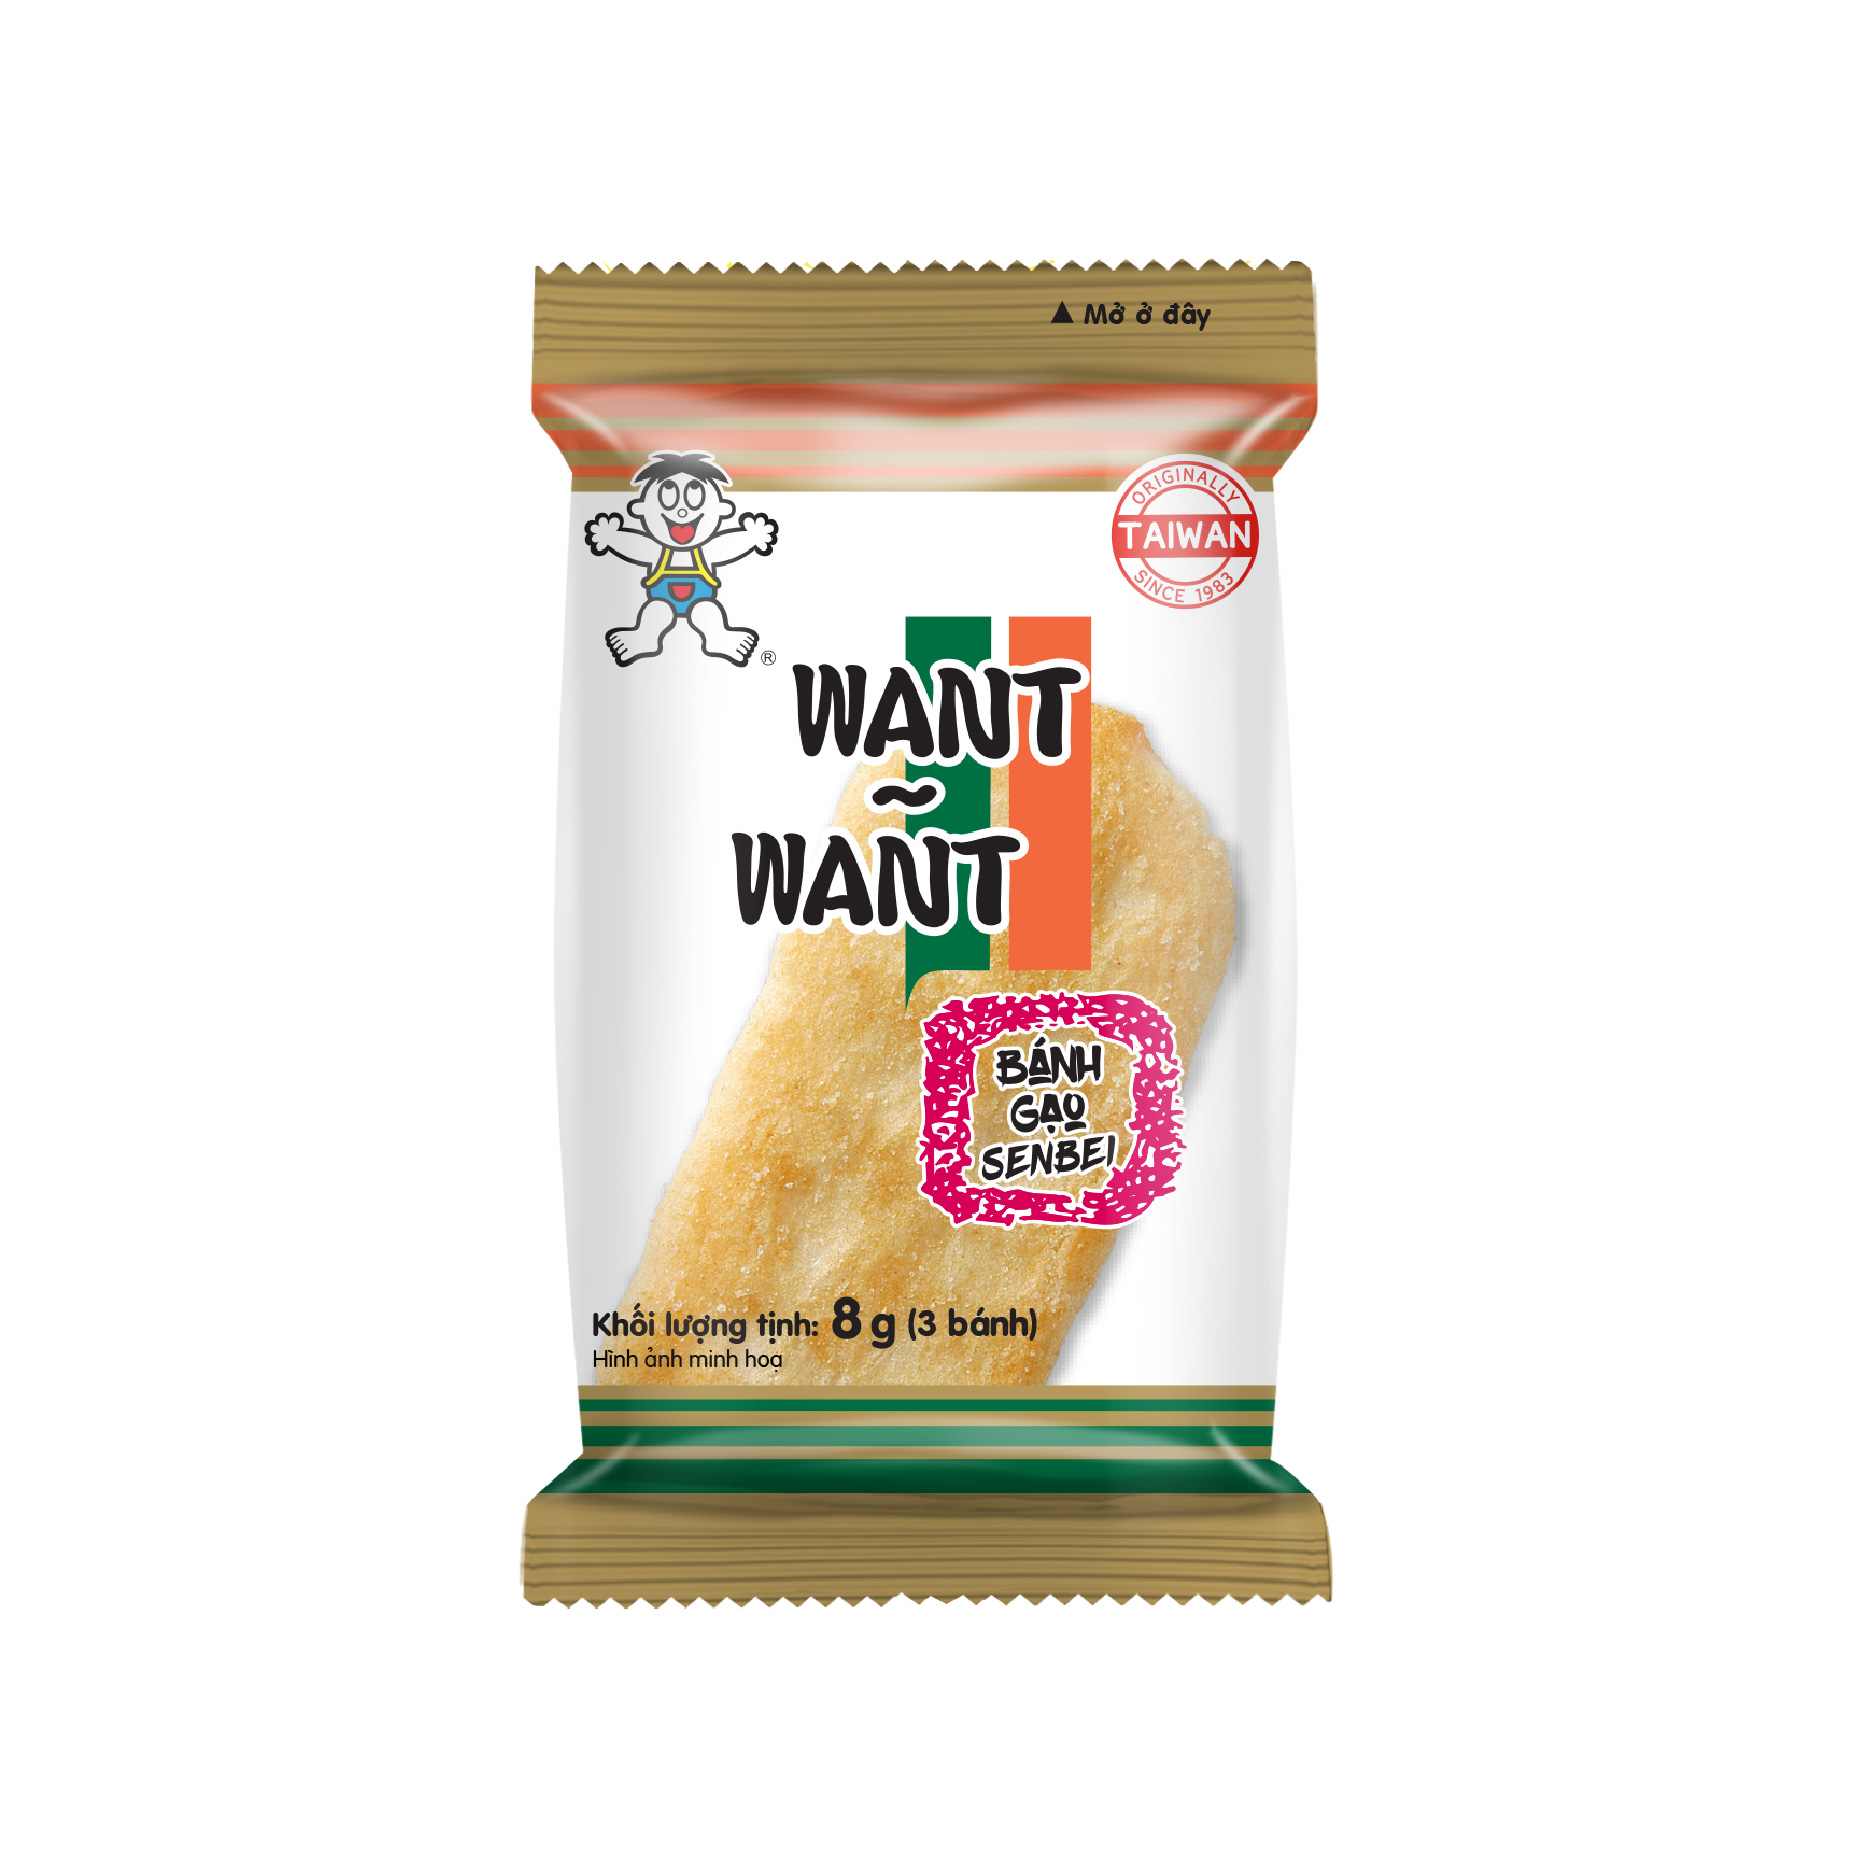 WANT WANT Rice Snack Japanese Soy Sauce Flavor 25g